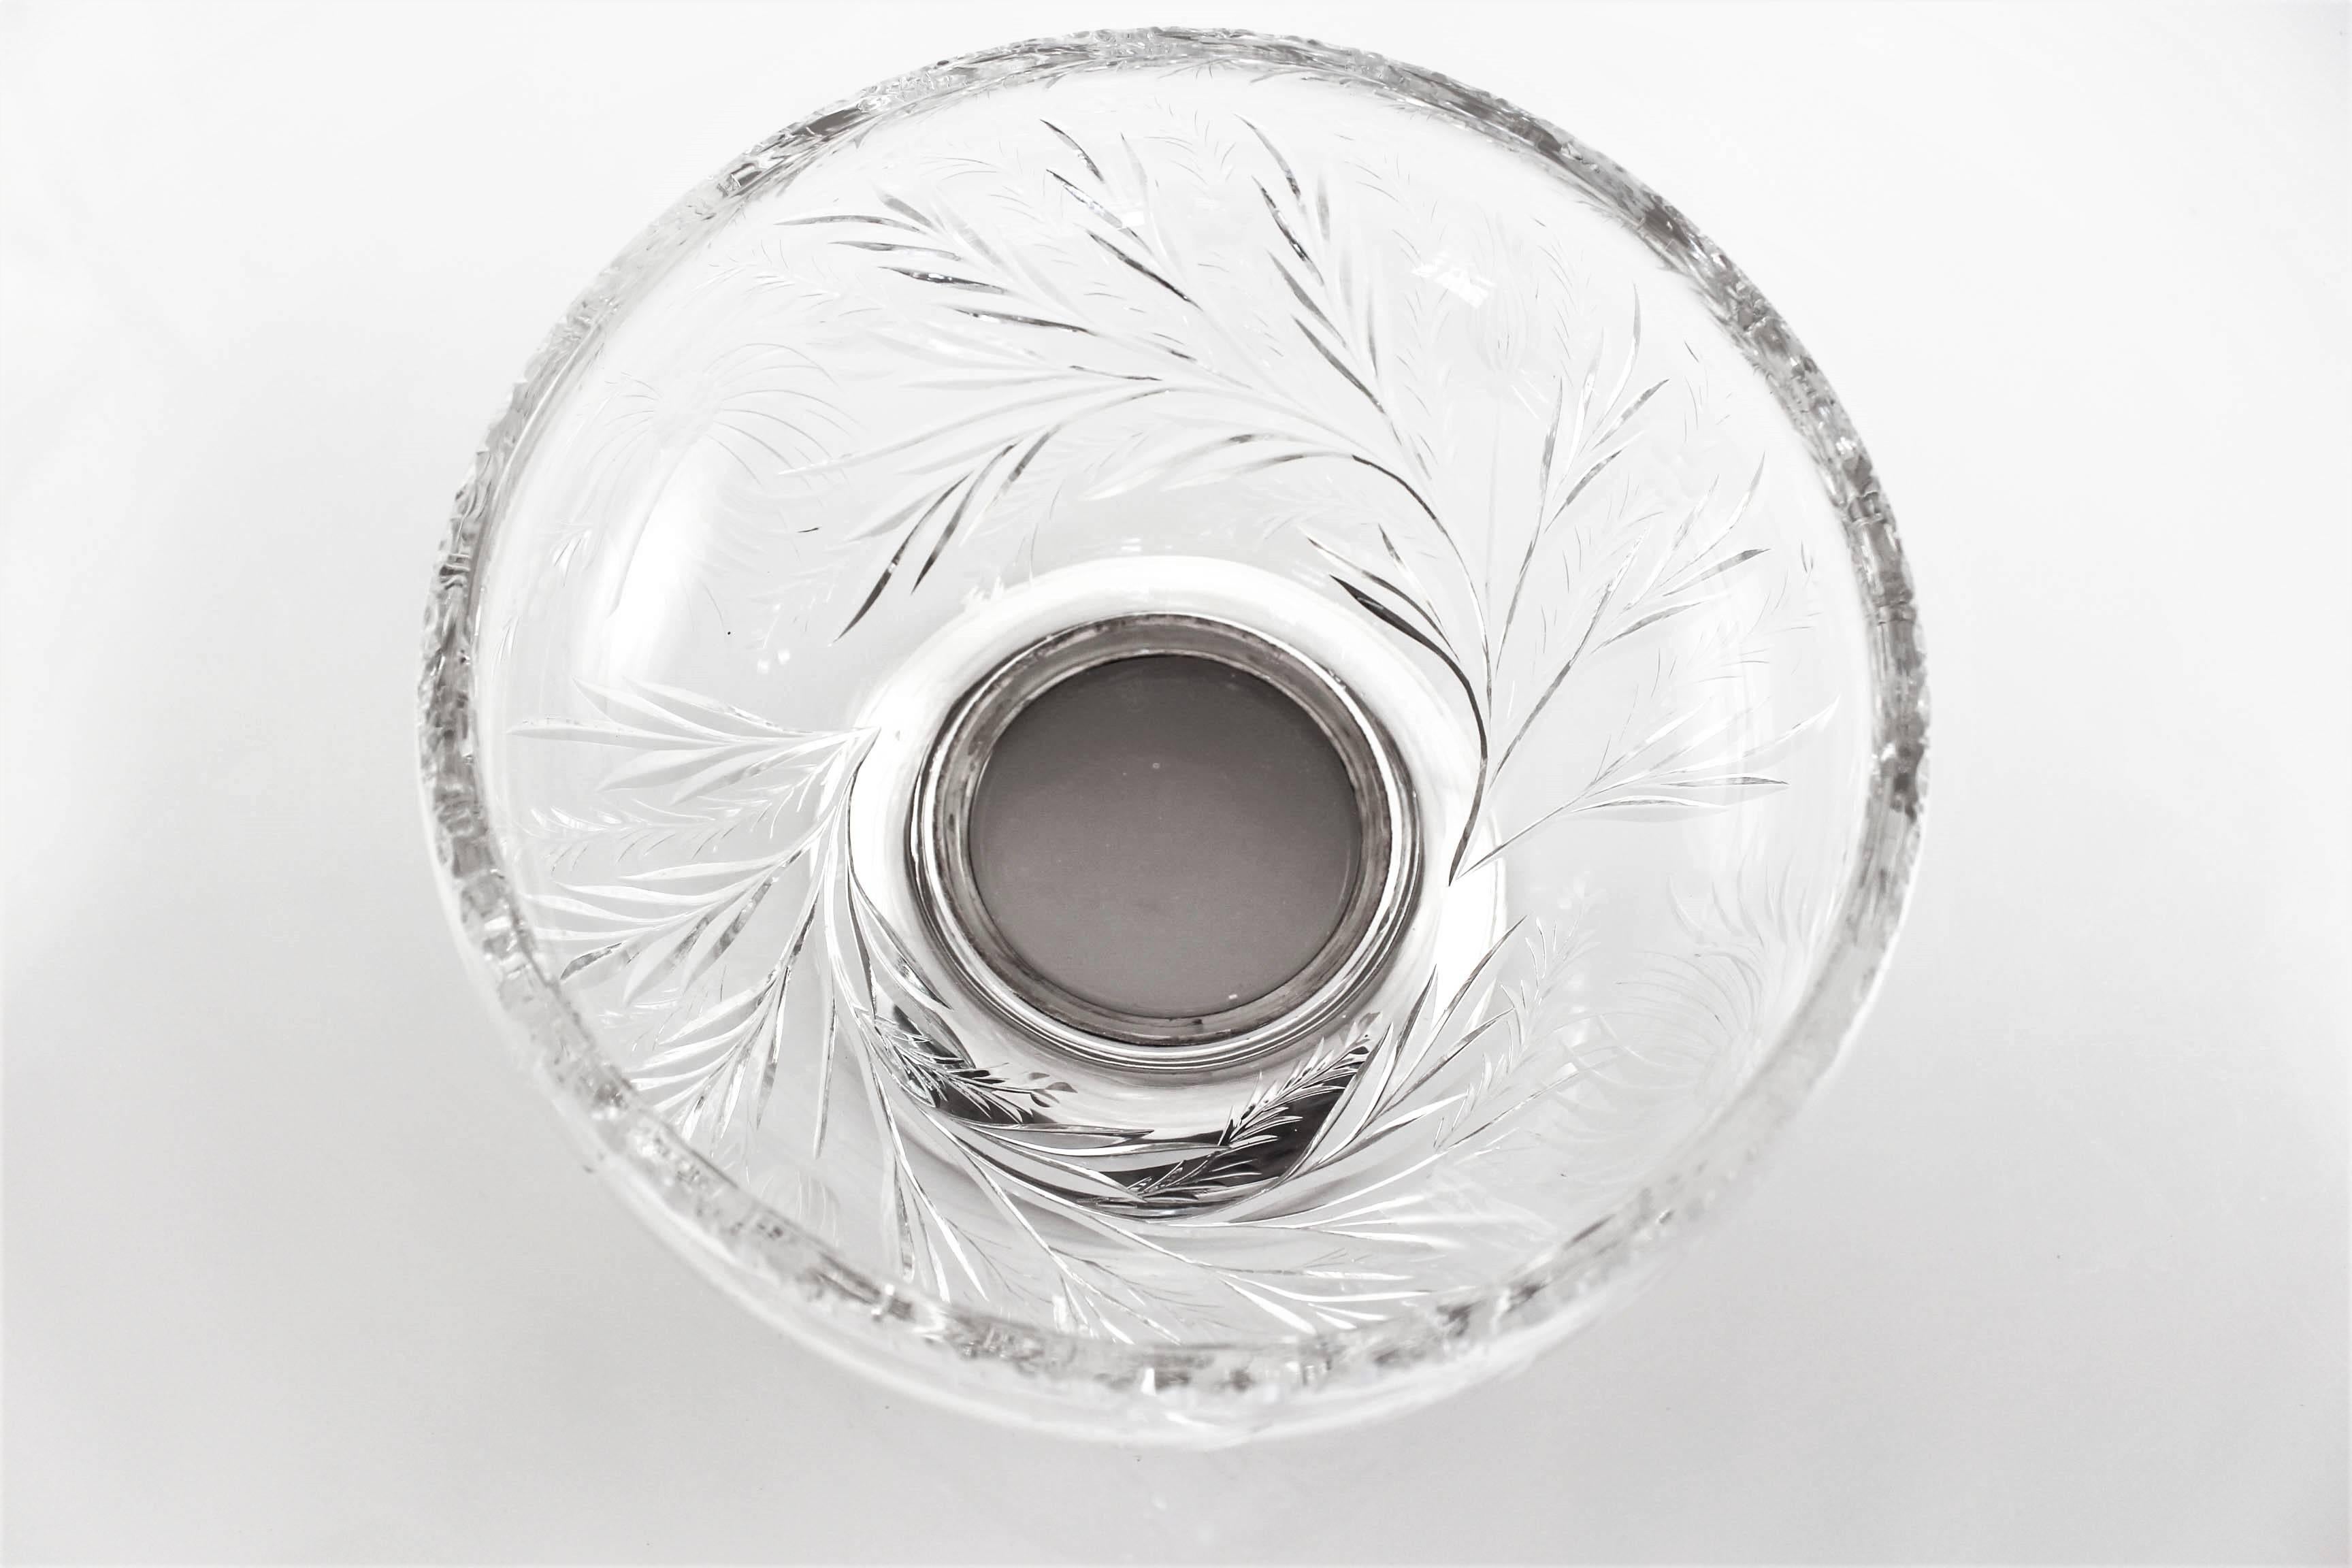 Hawkes crystal is world renowned for the quality and craftsmanship of yesteryear. It’s so rare to find Hawkes crystal because the company is no longer in existence. This large punch / fruit bowl is in mint condition. There are acid-etched sunflower